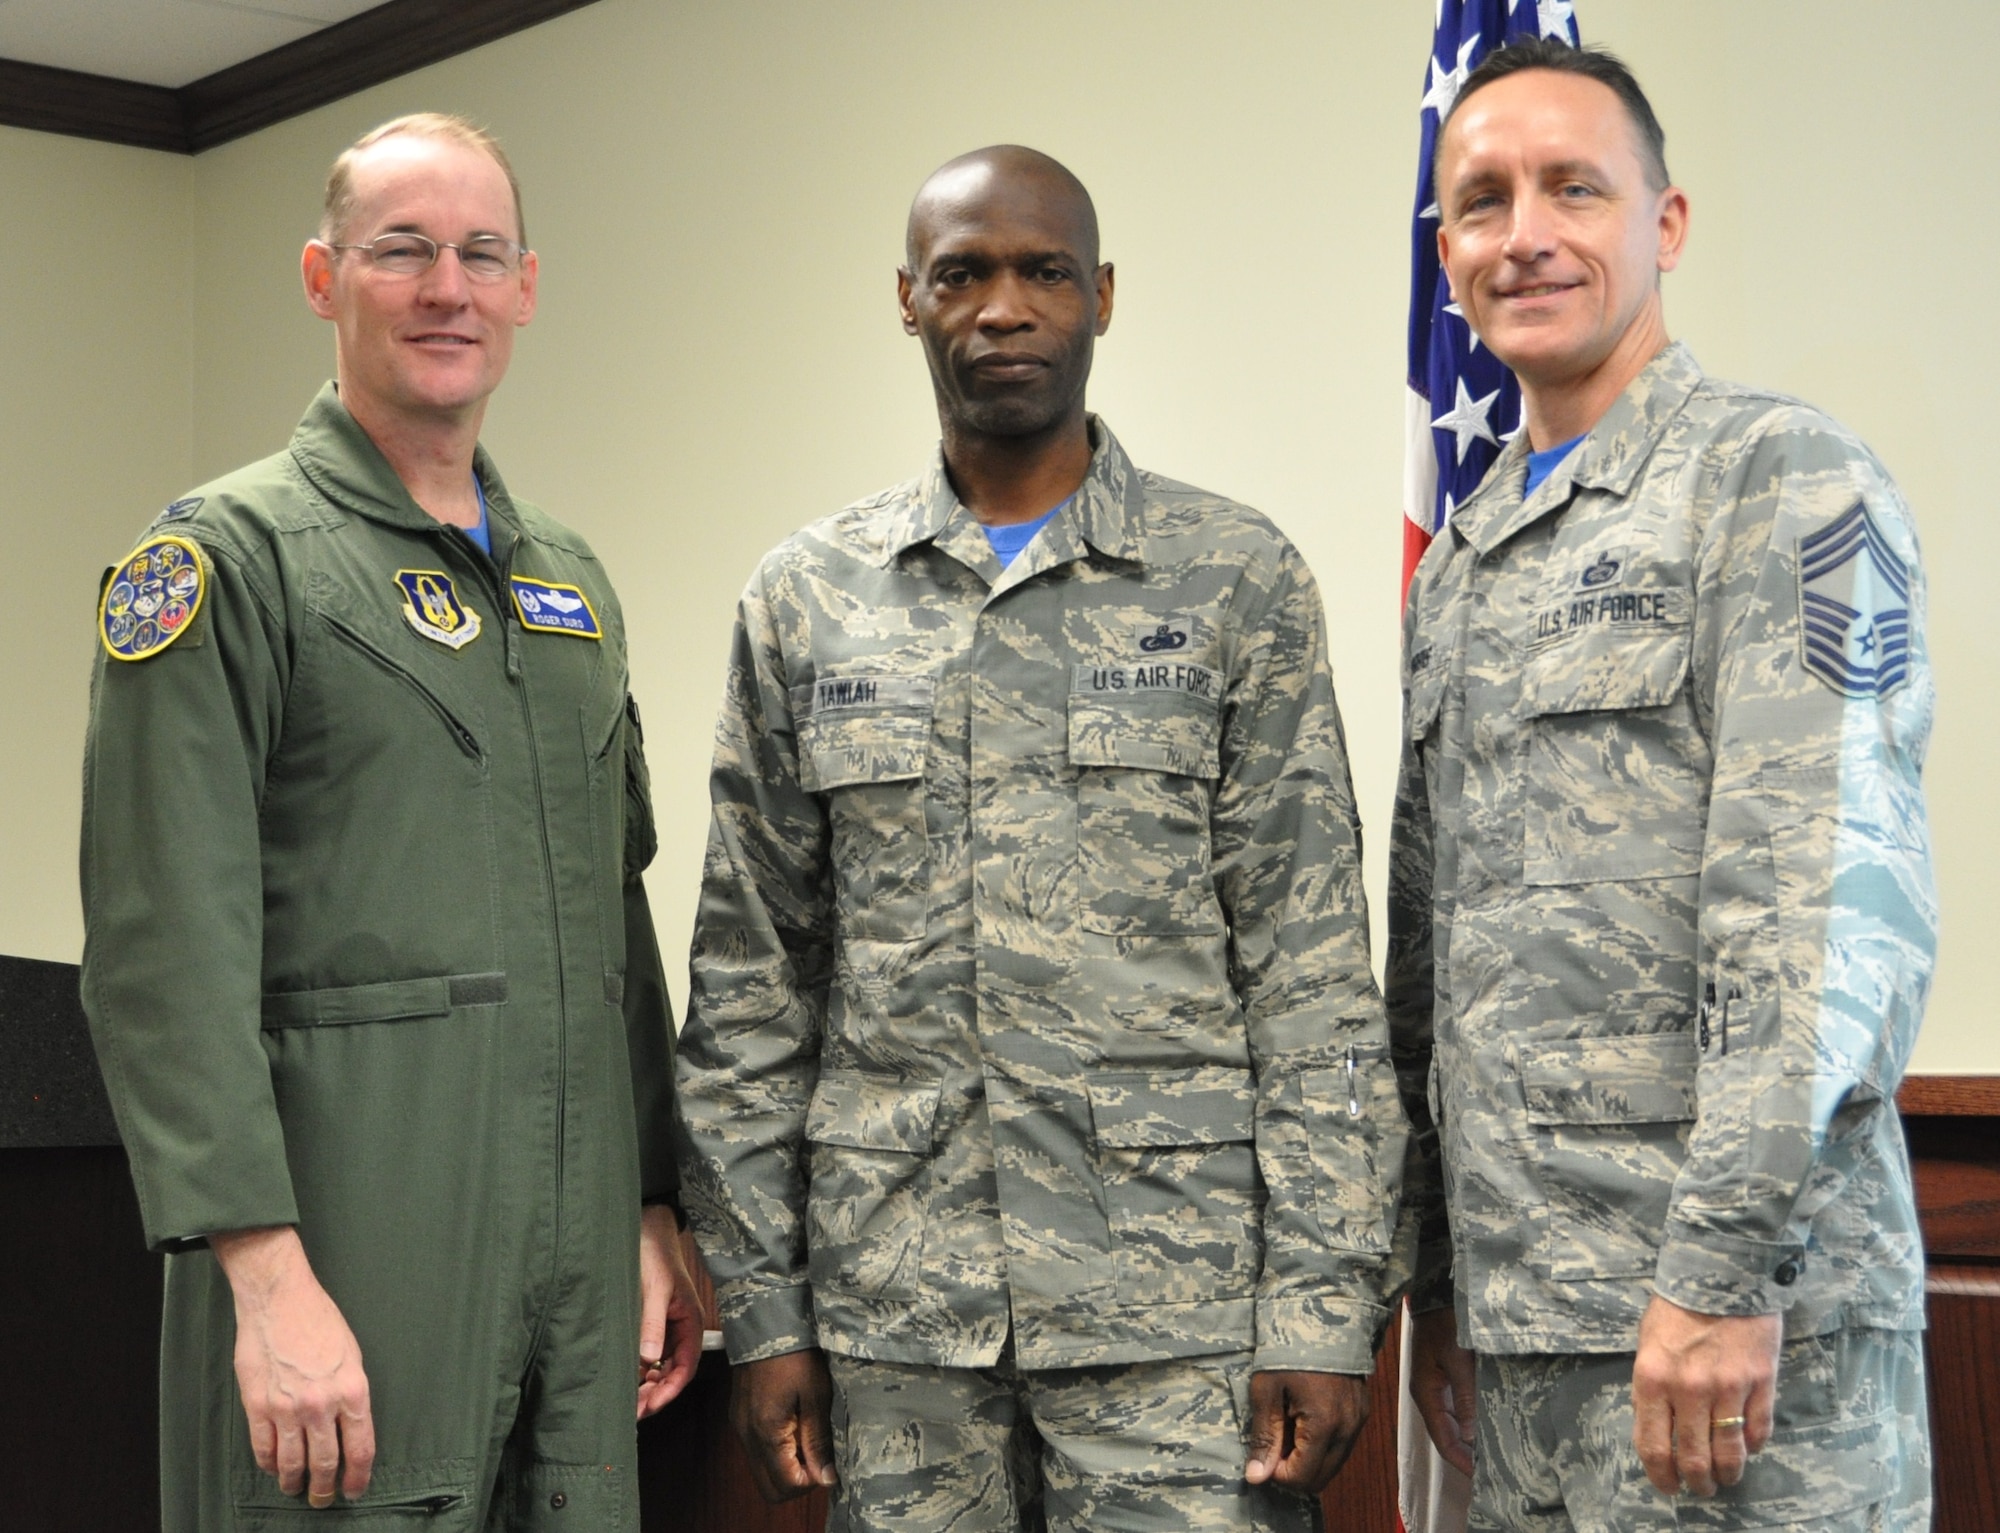 Senior Master Sgt. Kwame Tawiah stands with Col. Roger Suro, 340th FTG commander and group superintendent, Chief Master Sgt. Jimmie Morris during the group’s Dec. 1 MUTA at Joint Base San Antonio-Randolph, Texas  to recognize his selection as Humane Society Volunteer of the Month. (Photo by Janis El Shabazz).